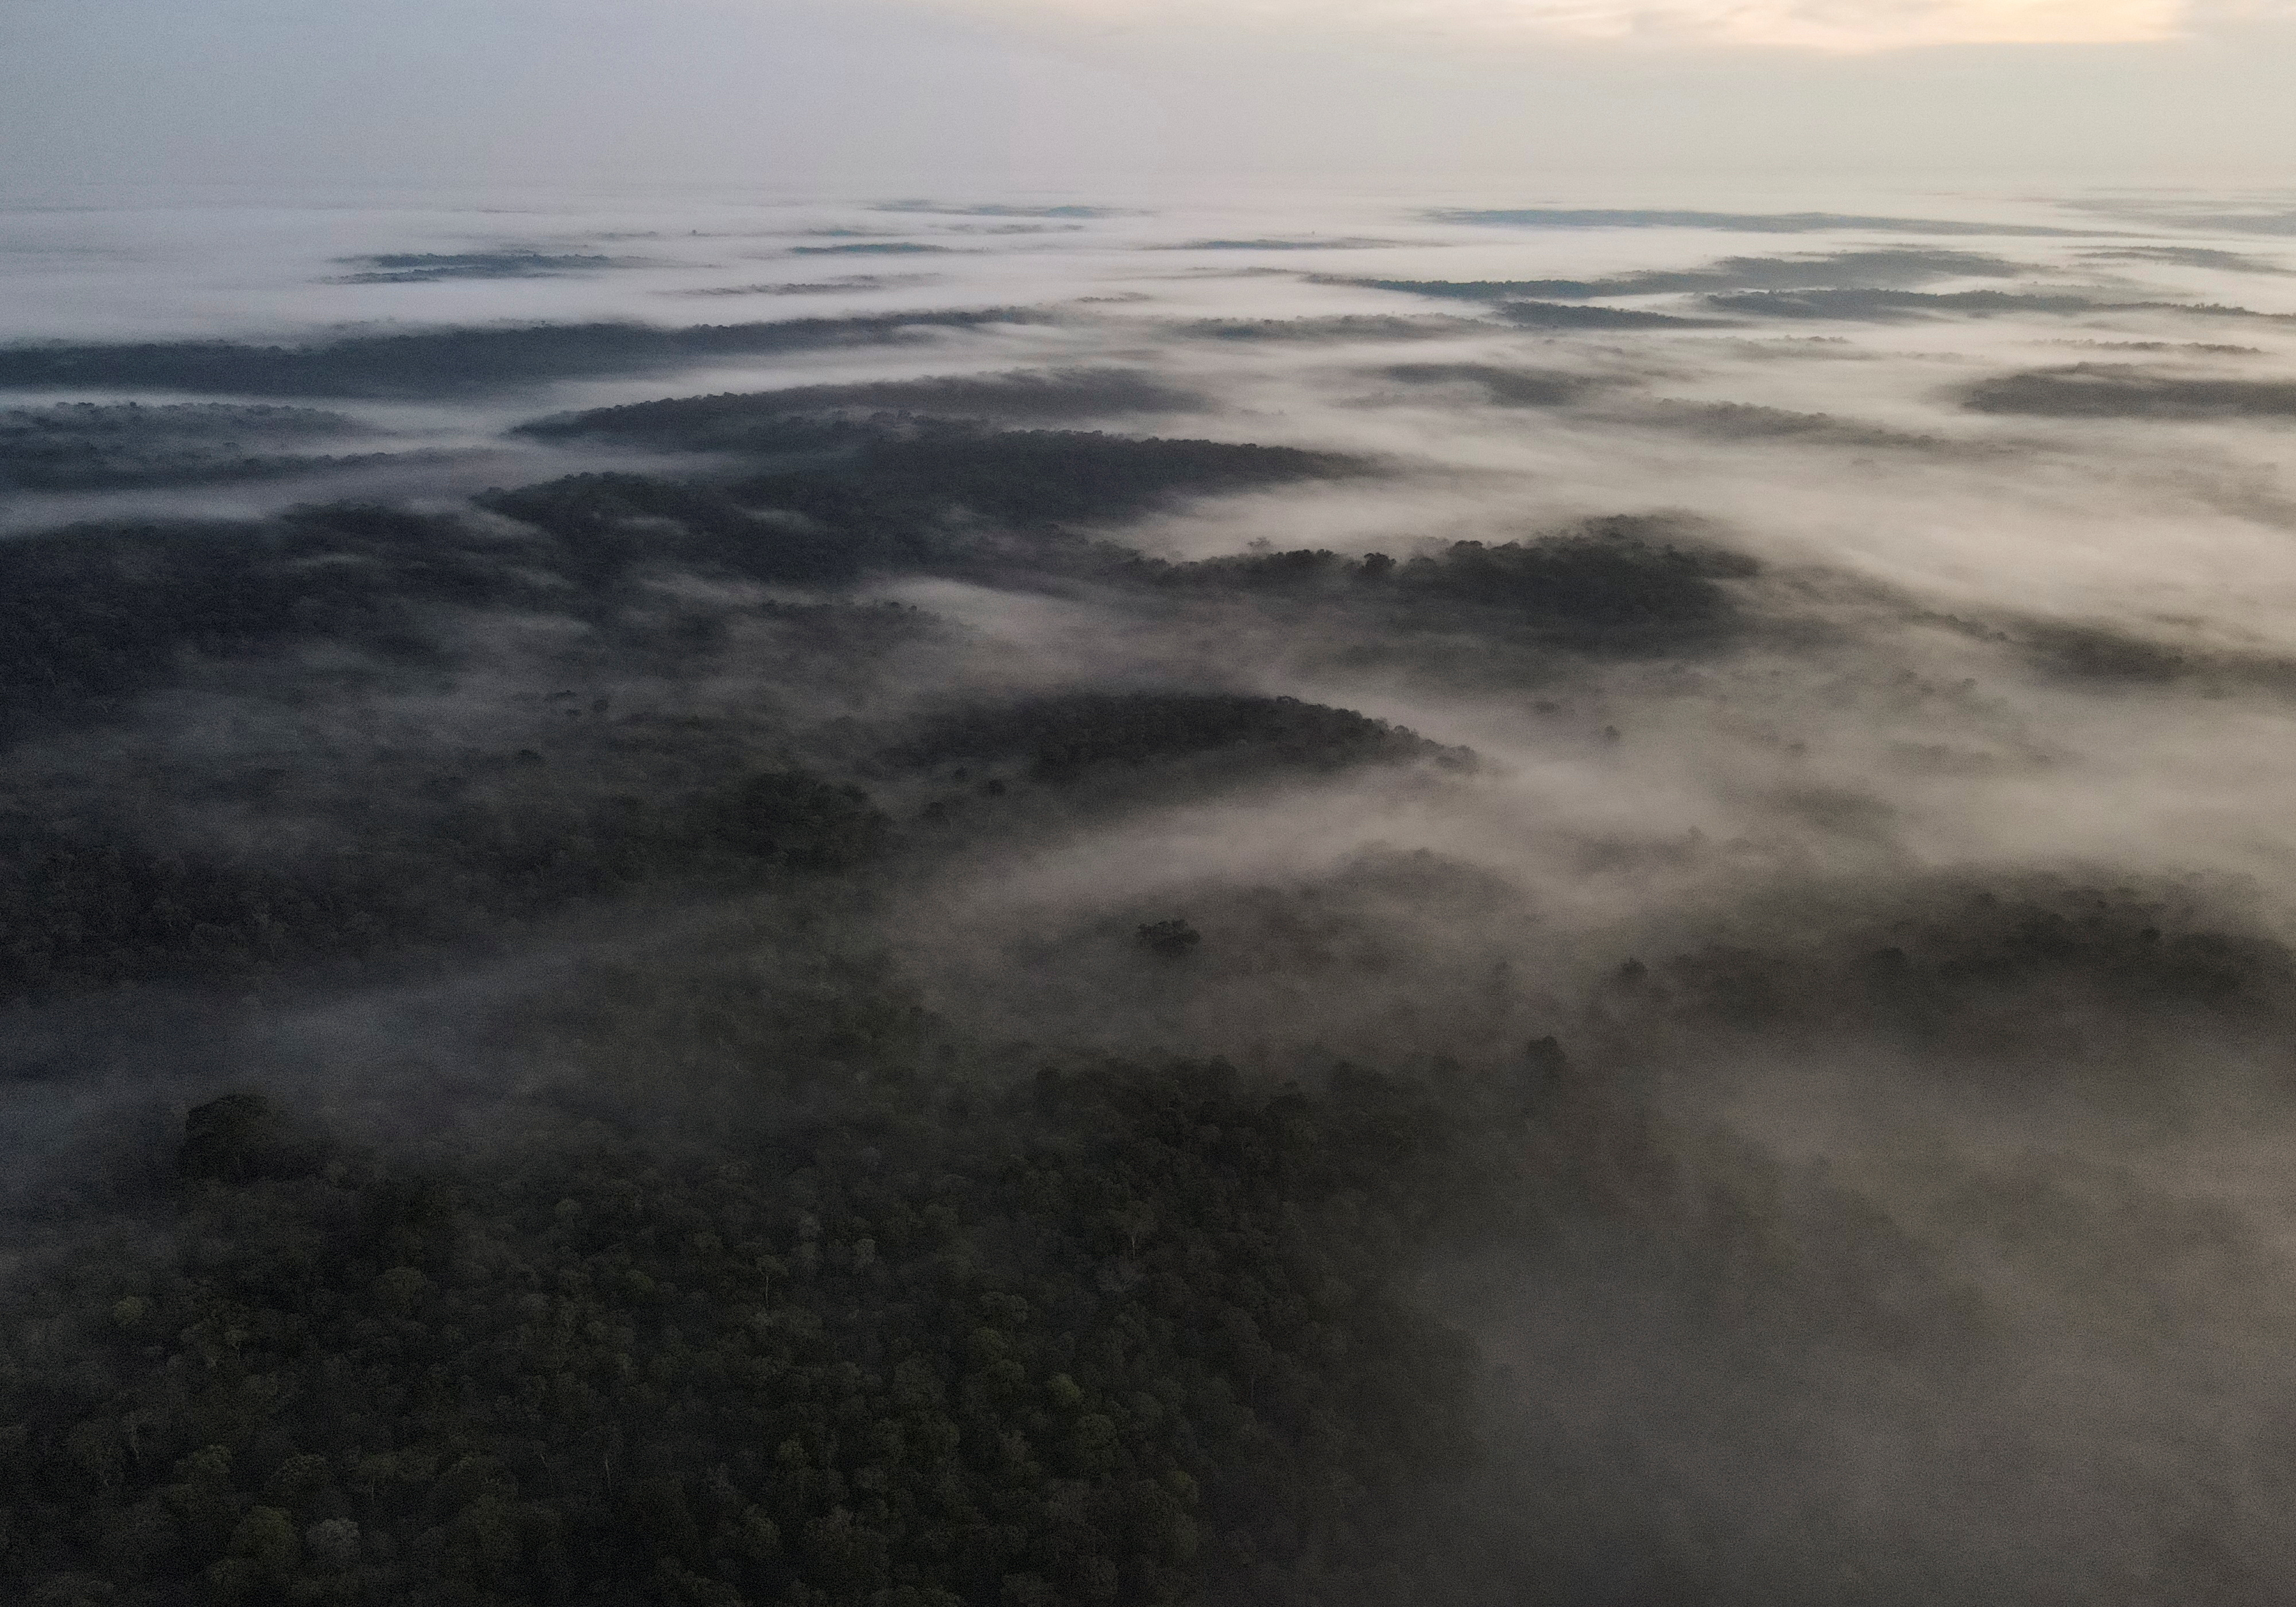 An aerial view shows trees and fog at the Amazon rainforest in Manaus